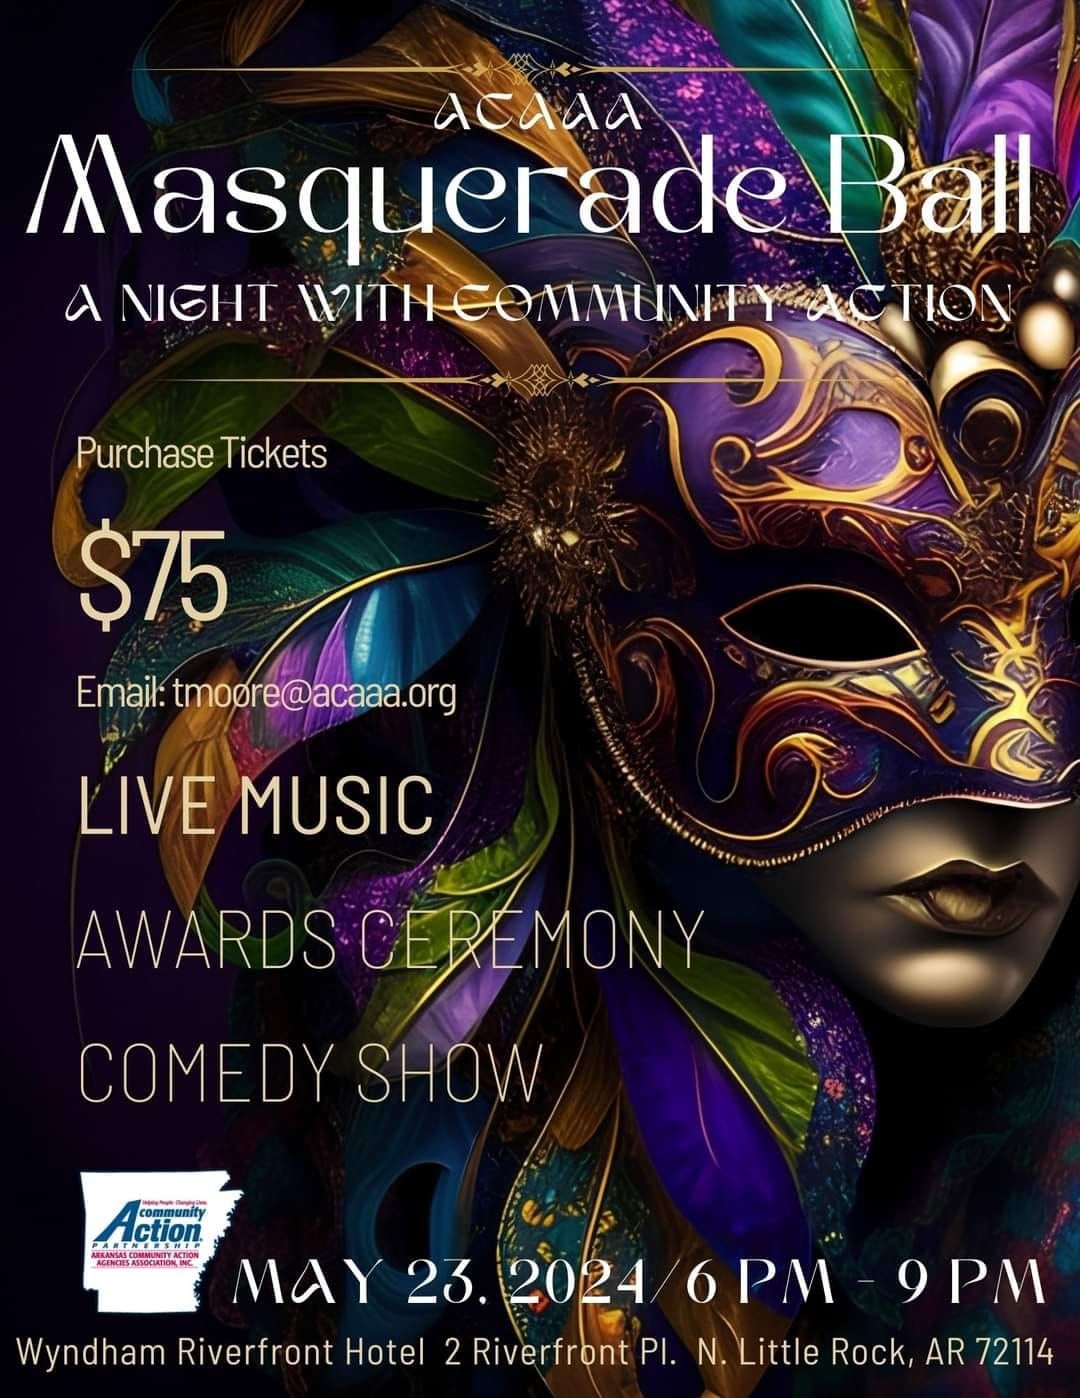 A Night with Community Action: Masquerade Ball